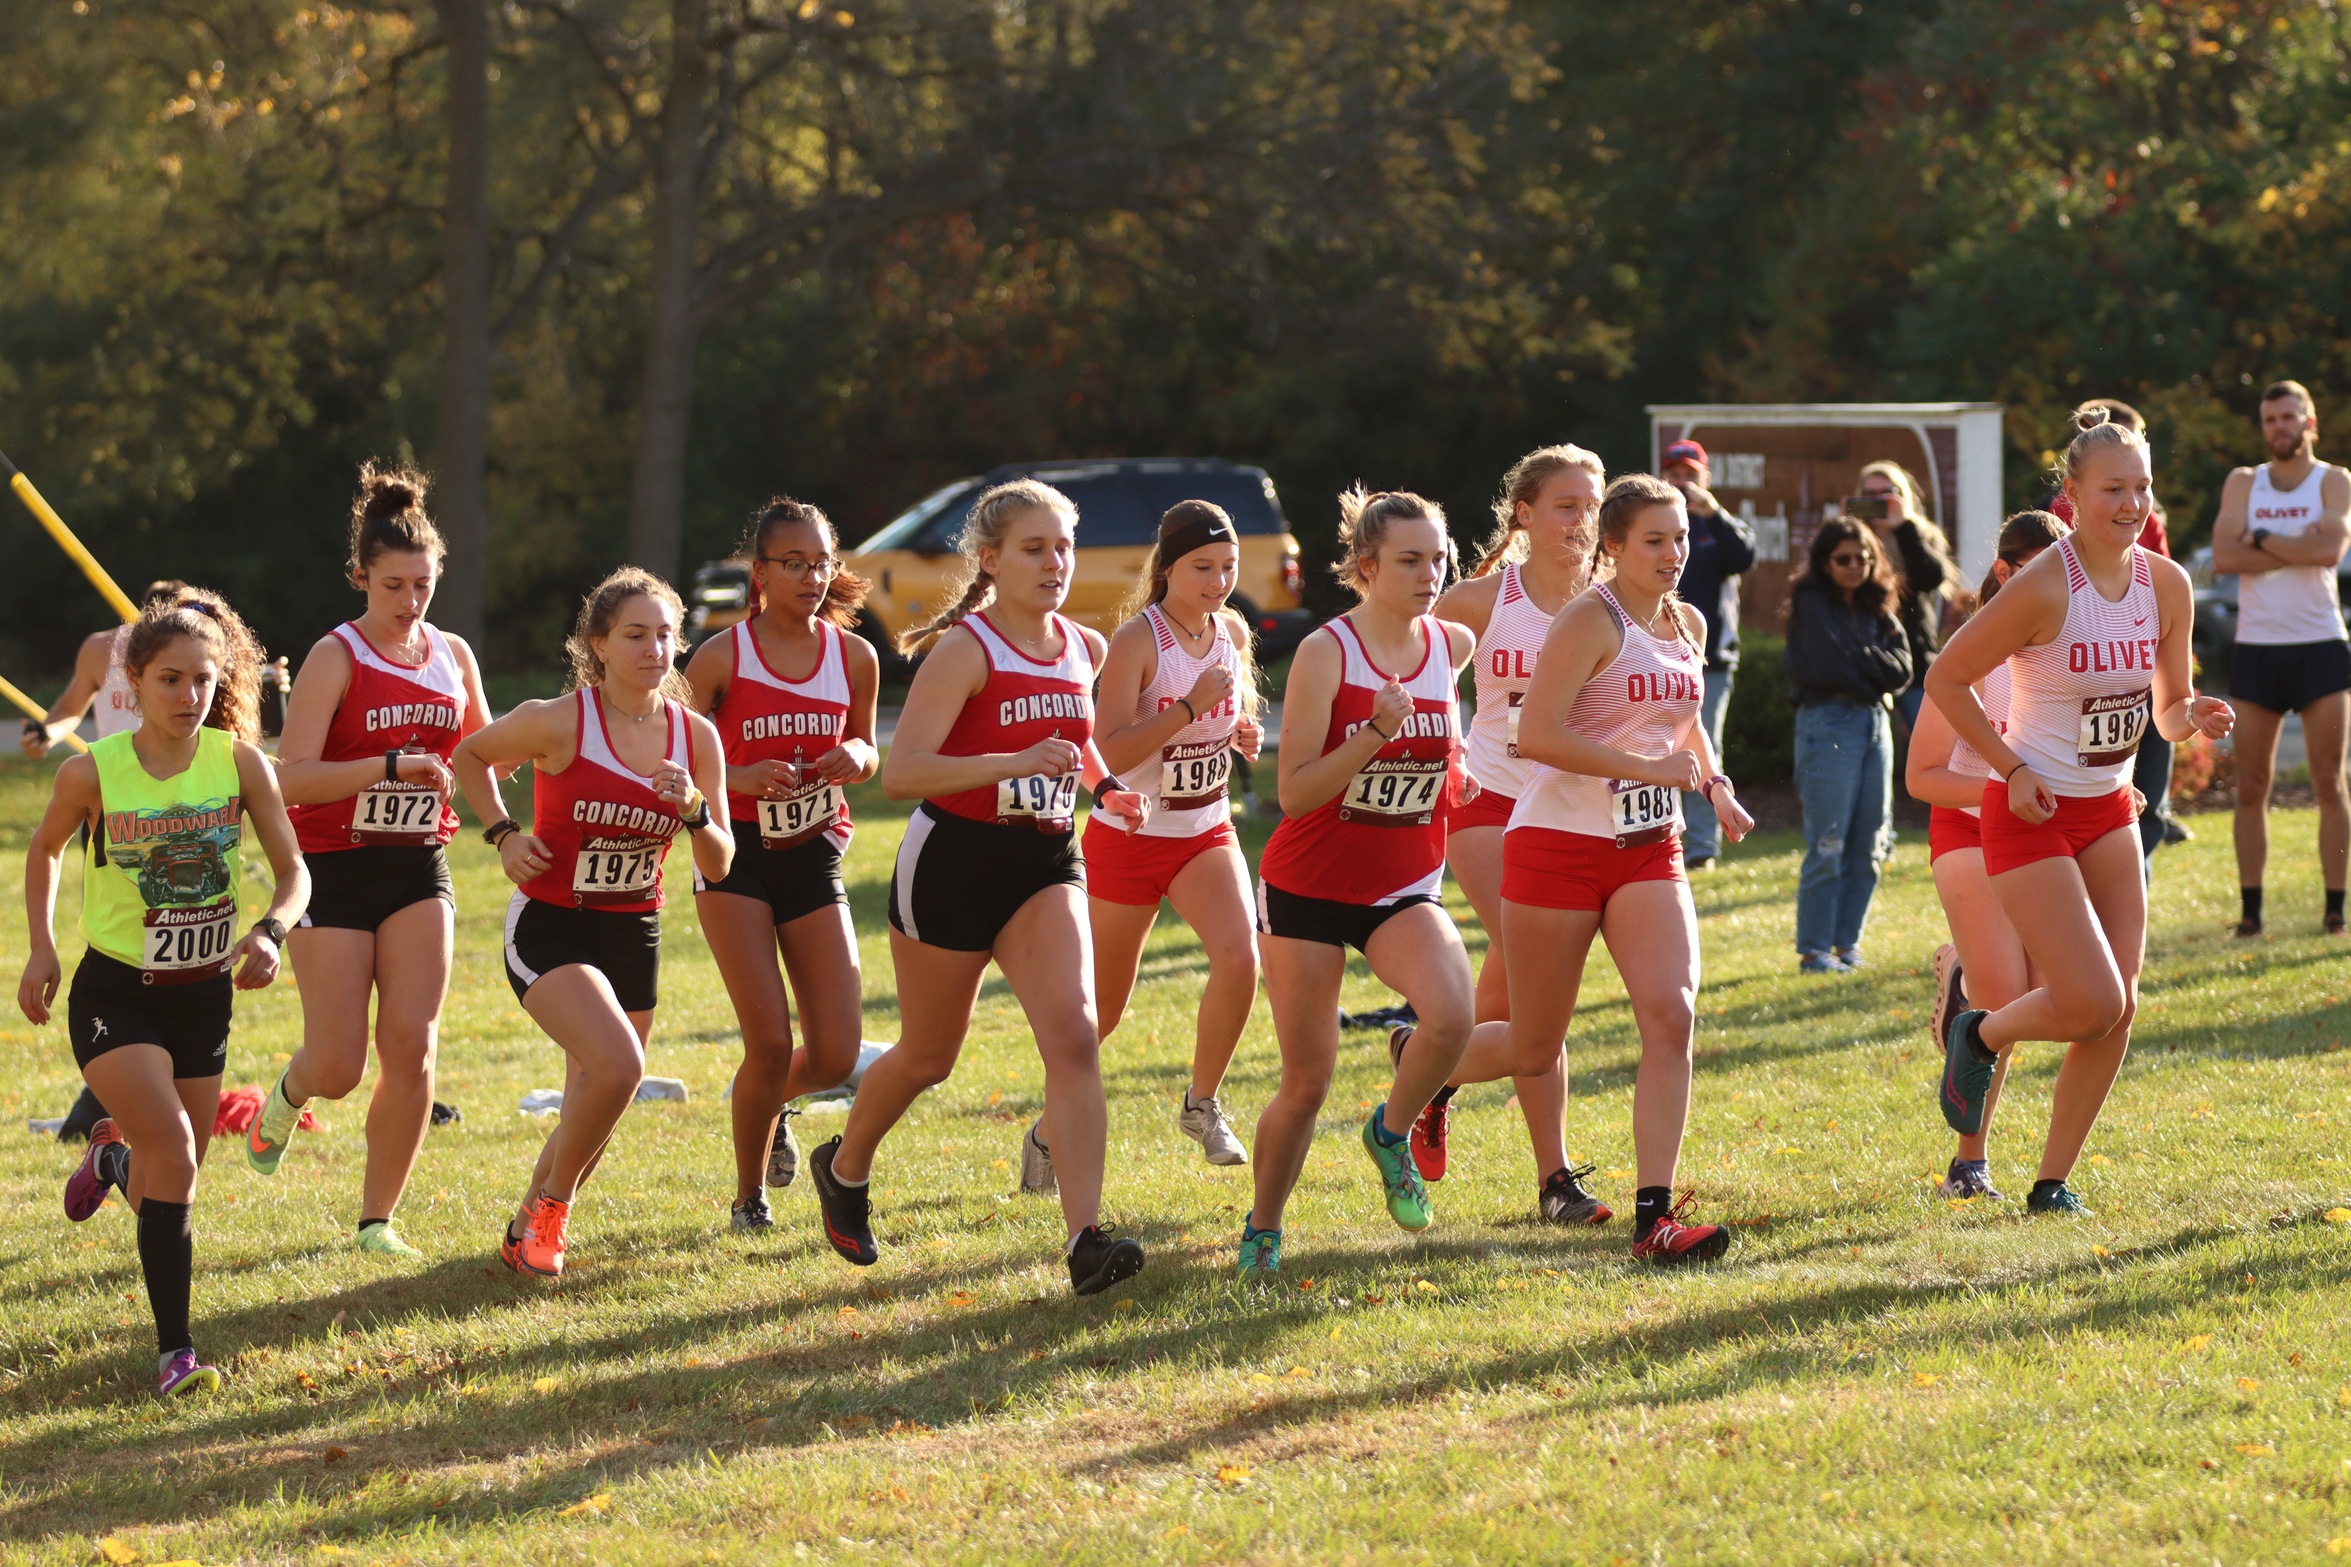 Women's Cross Country competes at the Great Lakes Challenge